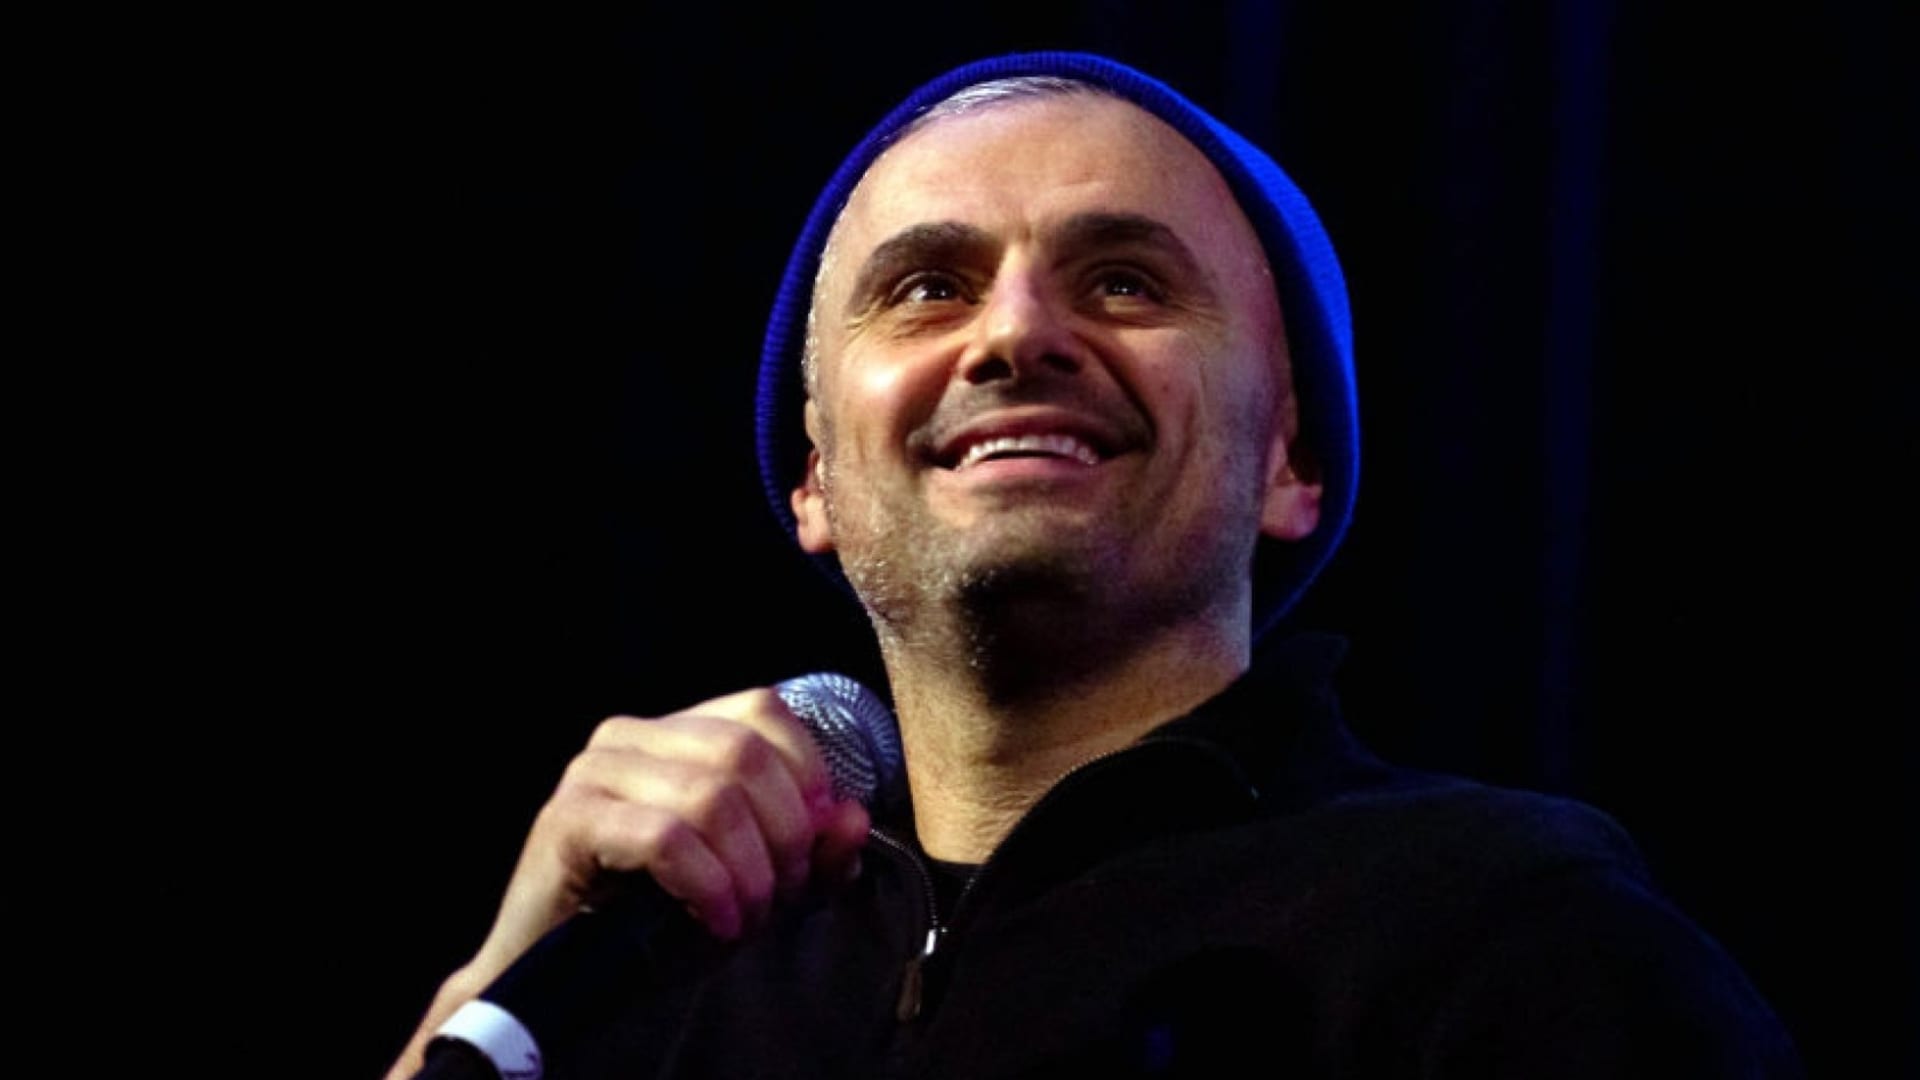 Gary Vaynerchuk's "Sour OJ" Lesson on Compassion Is One Everyone Needs to Hear — and Many Don't Understand